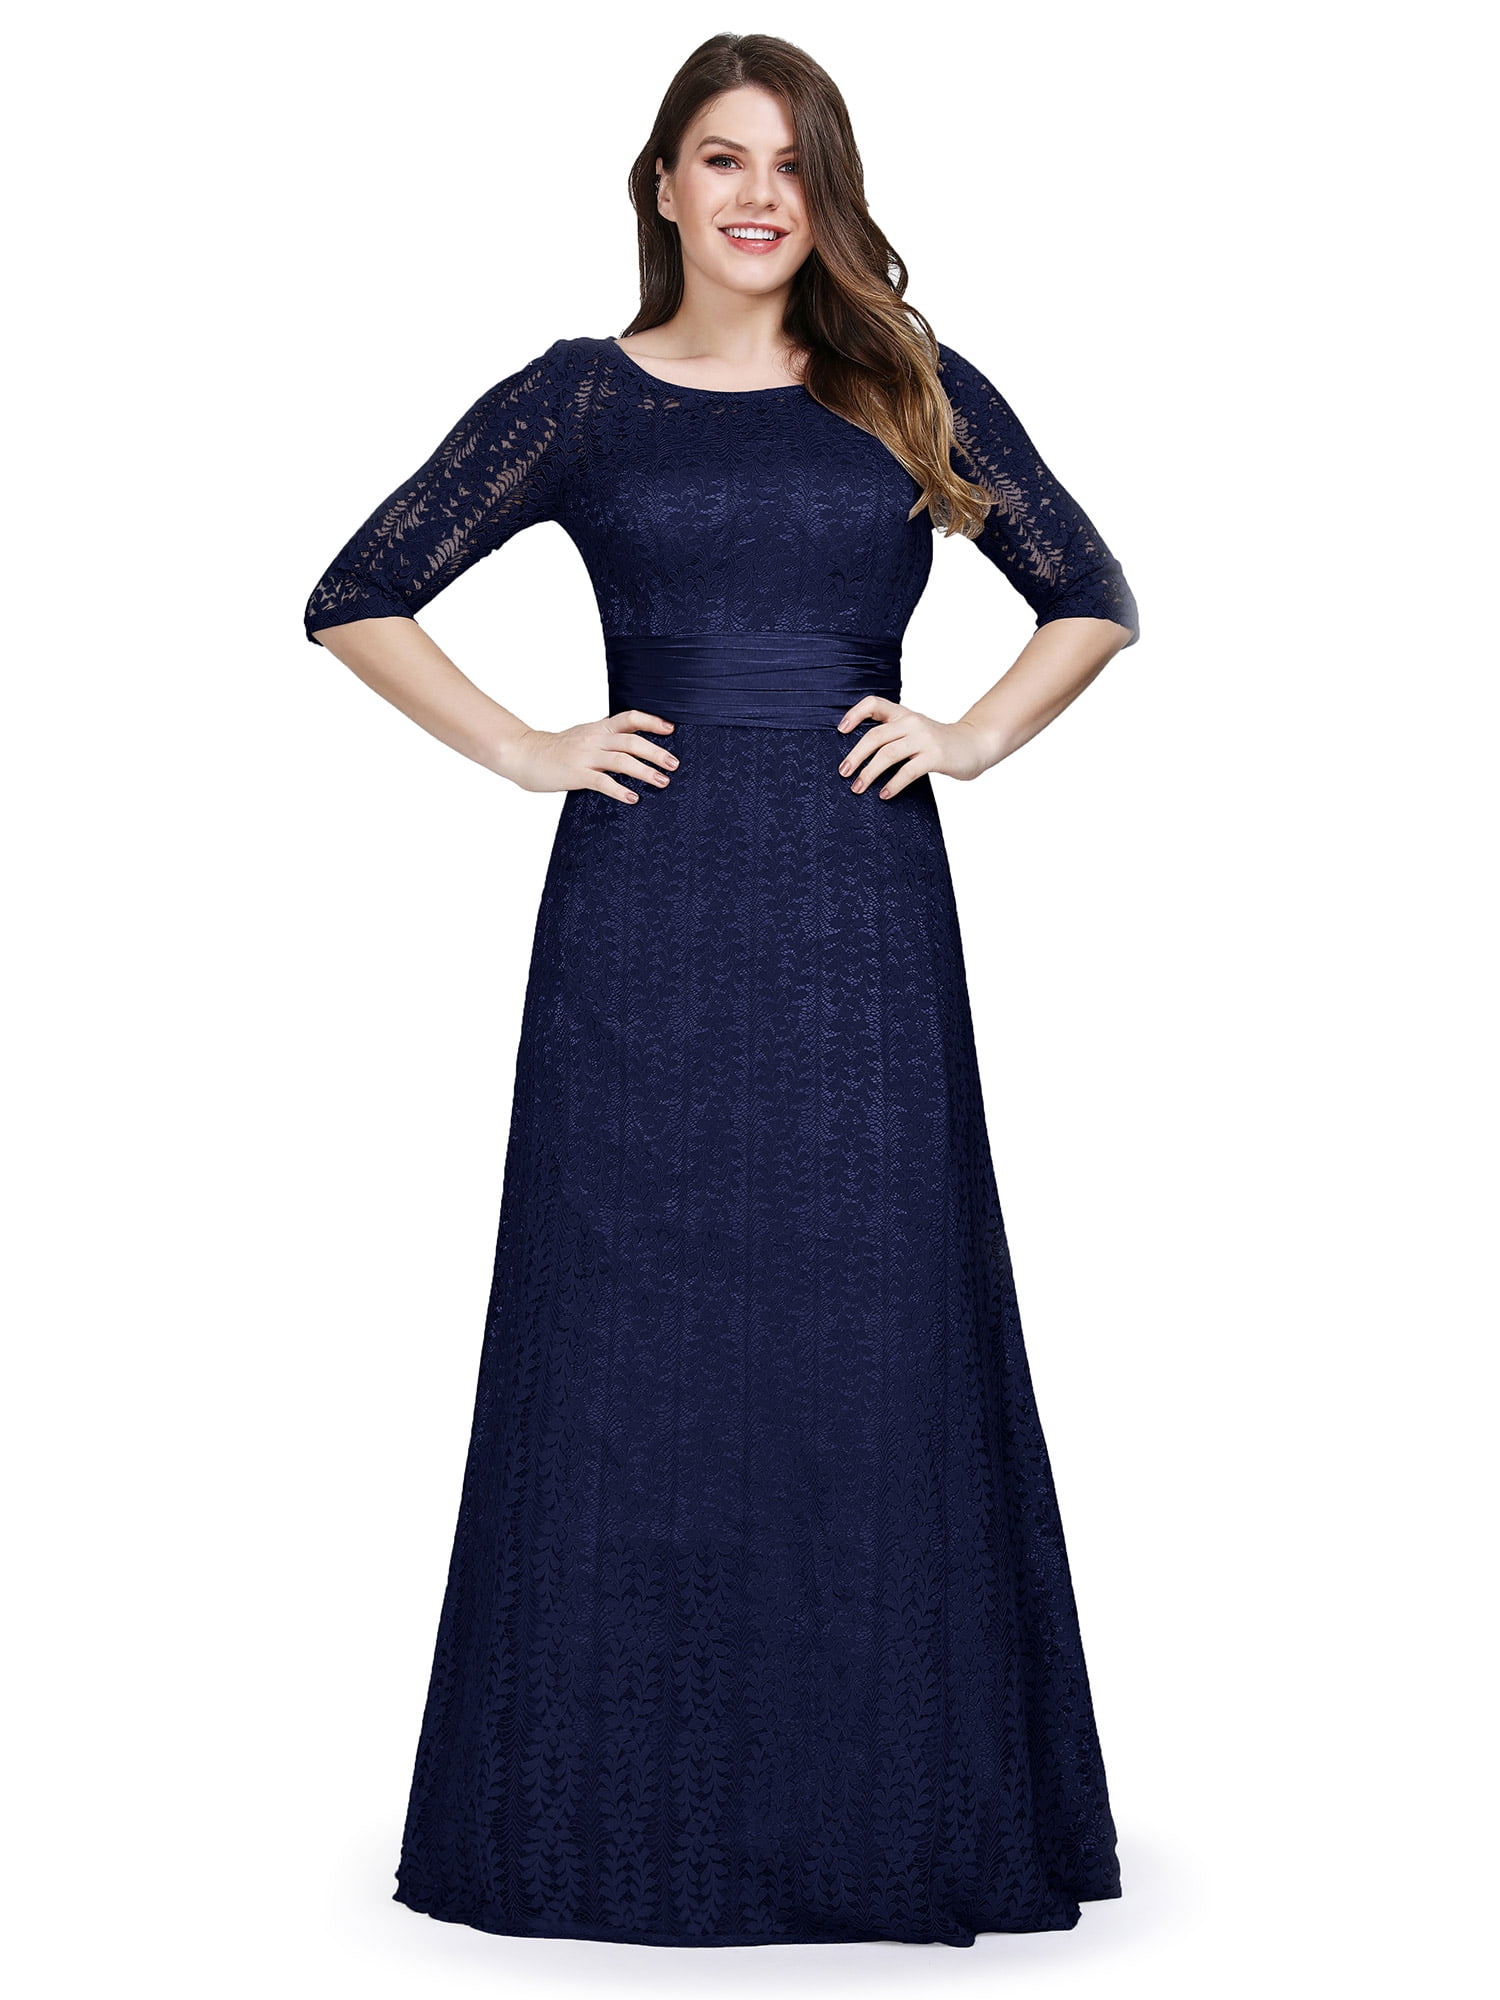 Ever-Pretty Formal Long Sleeve Prom Gown Bridesmaid Dresses Evening Party 08878 